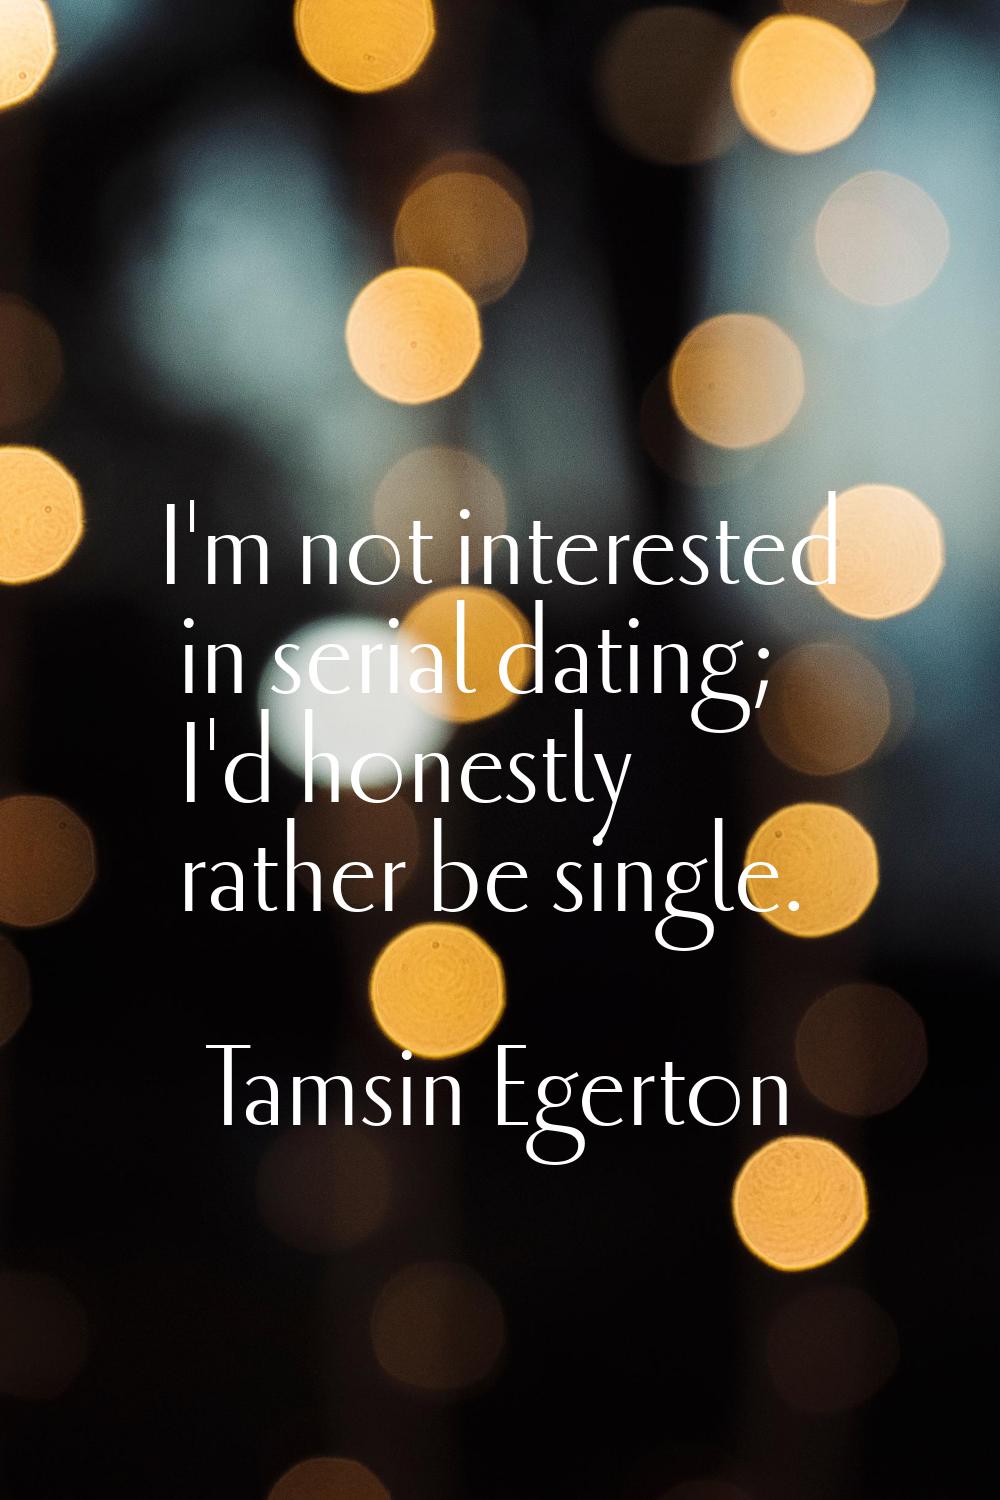 I'm not interested in serial dating; I'd honestly rather be single.